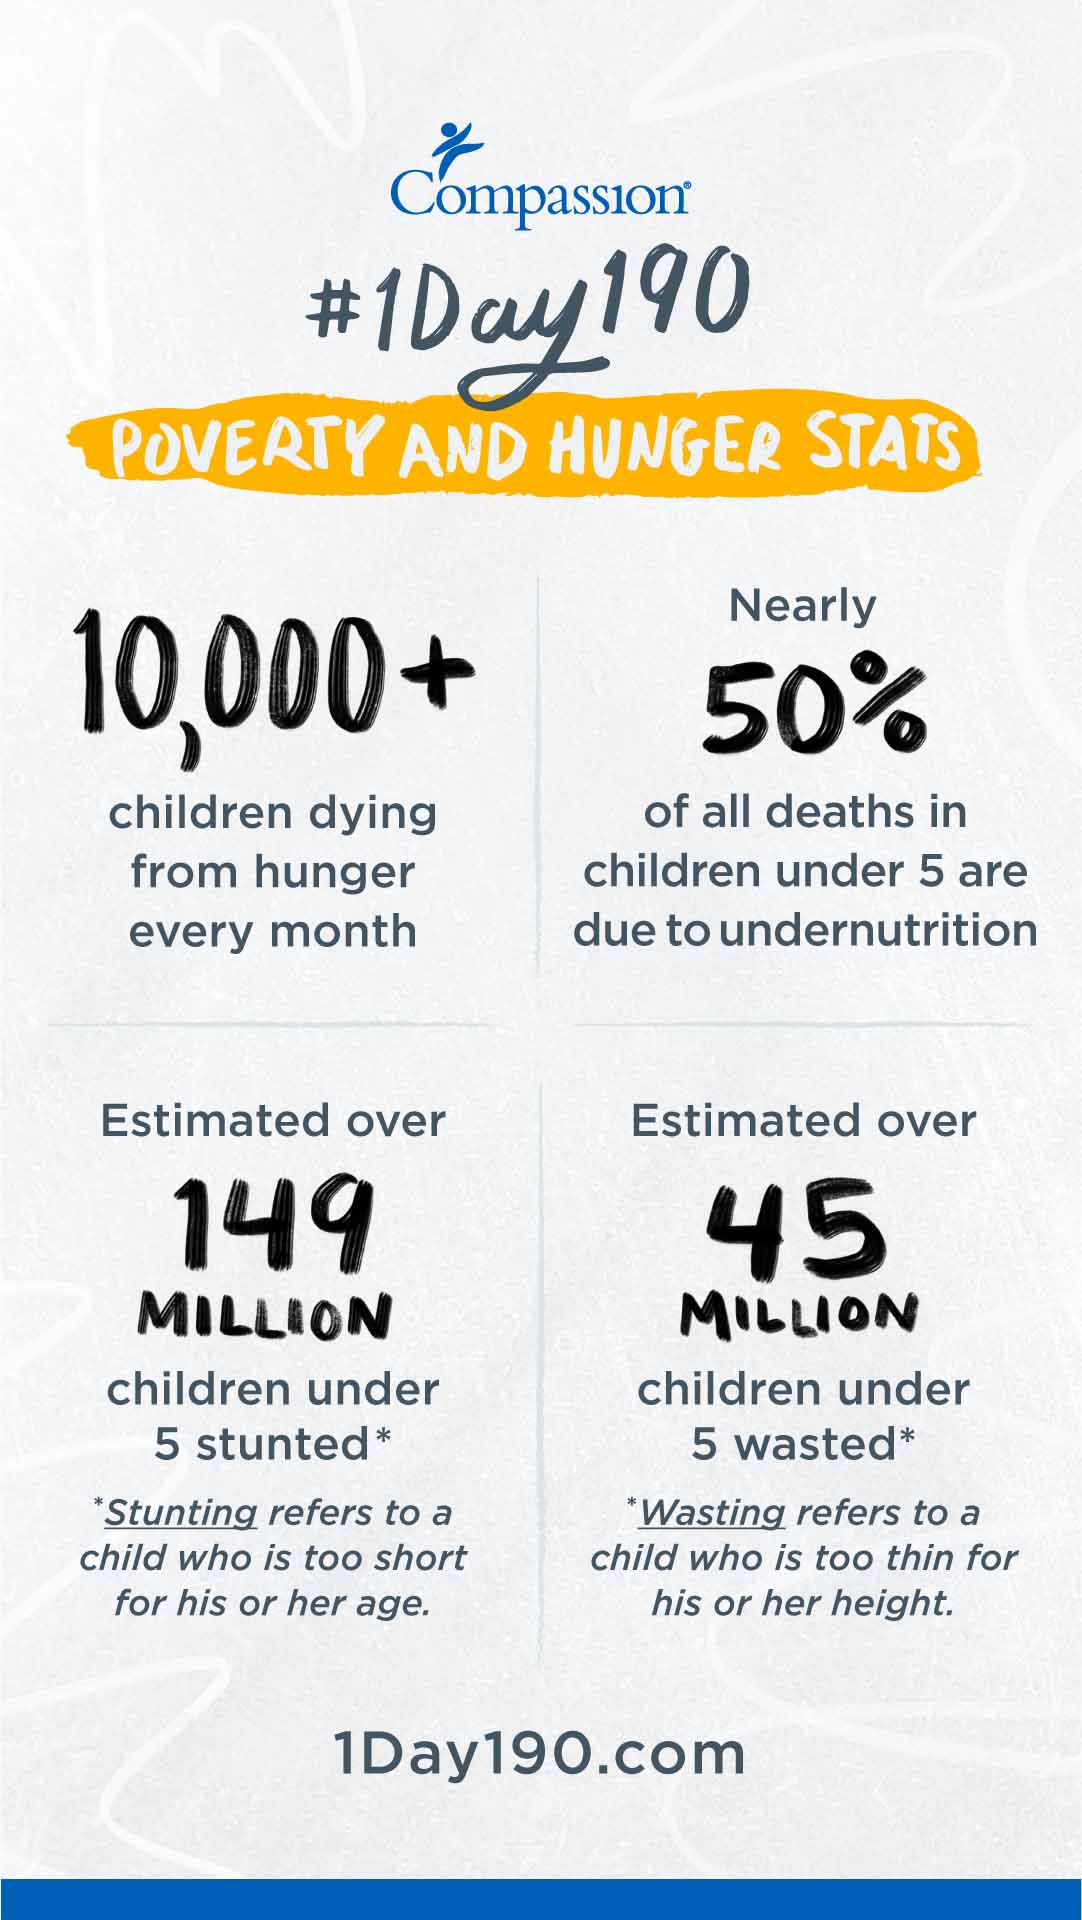 Millions of children suffer from stunting and malnutrition